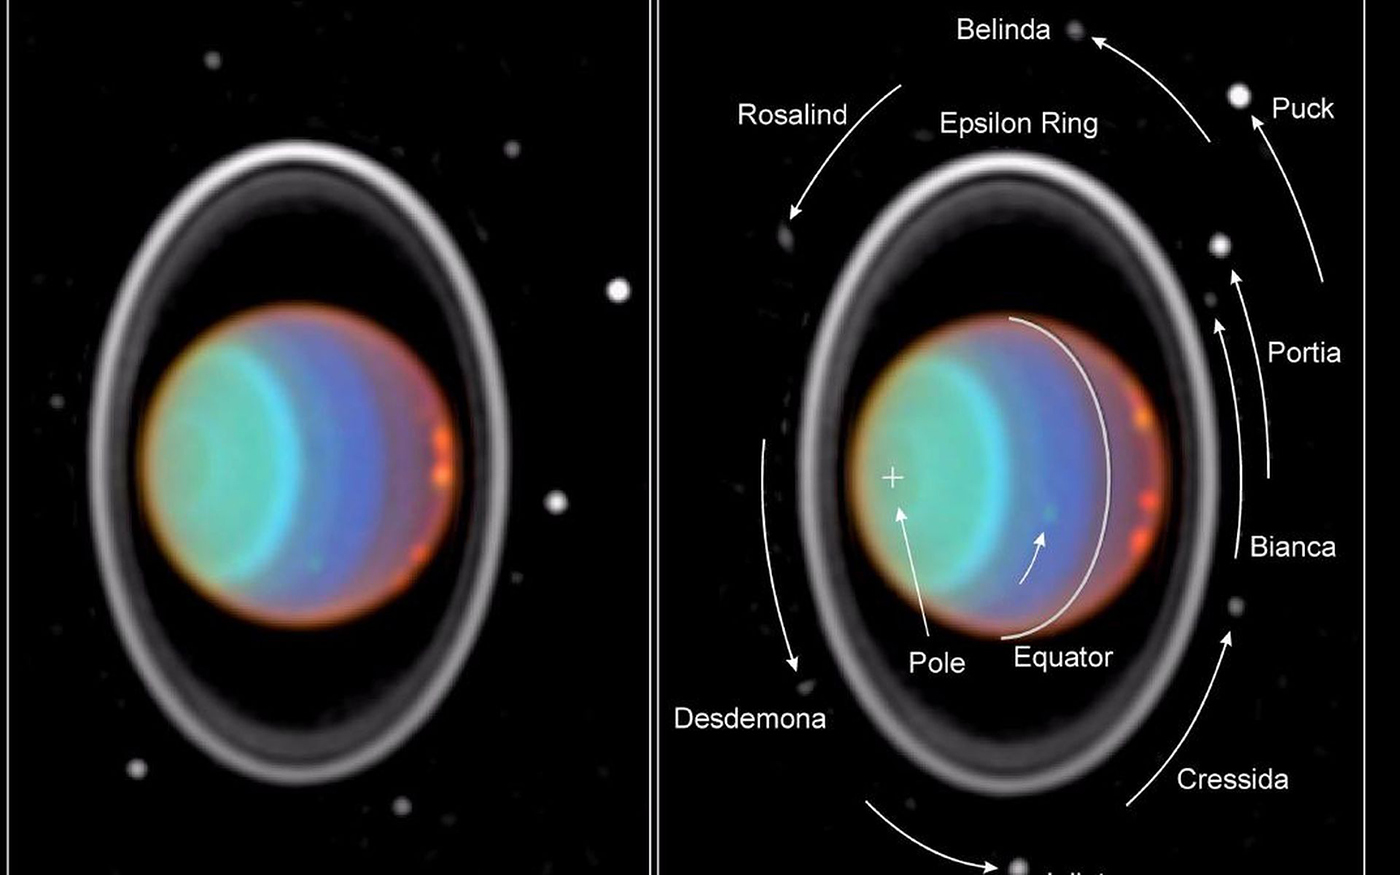 Taking its first peek at Uranus, NASA Hubble Space Telescope's Near Infrared Camera and Multi-Object Spectrometer (NICMOS) has detected six distinct clouds in images taken July 28, 1997. Hubble also captured eight moons in this image. Image Credit: NASA/JPL/STScI